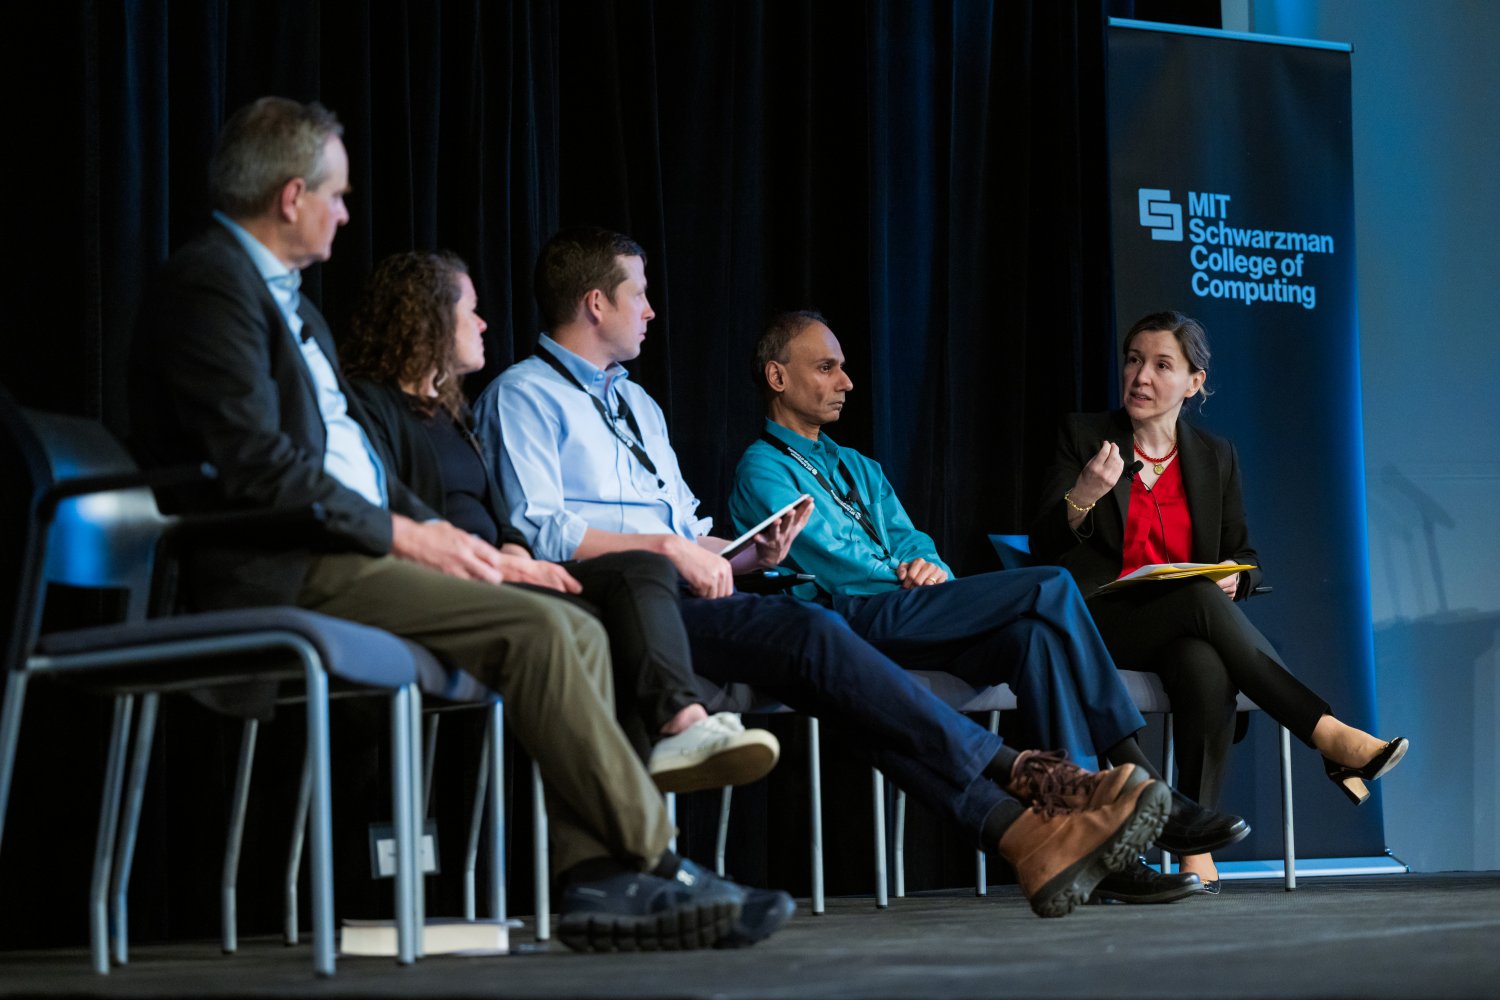 Bringing the social and ethical responsibilities of computing to the forefront | MIT News